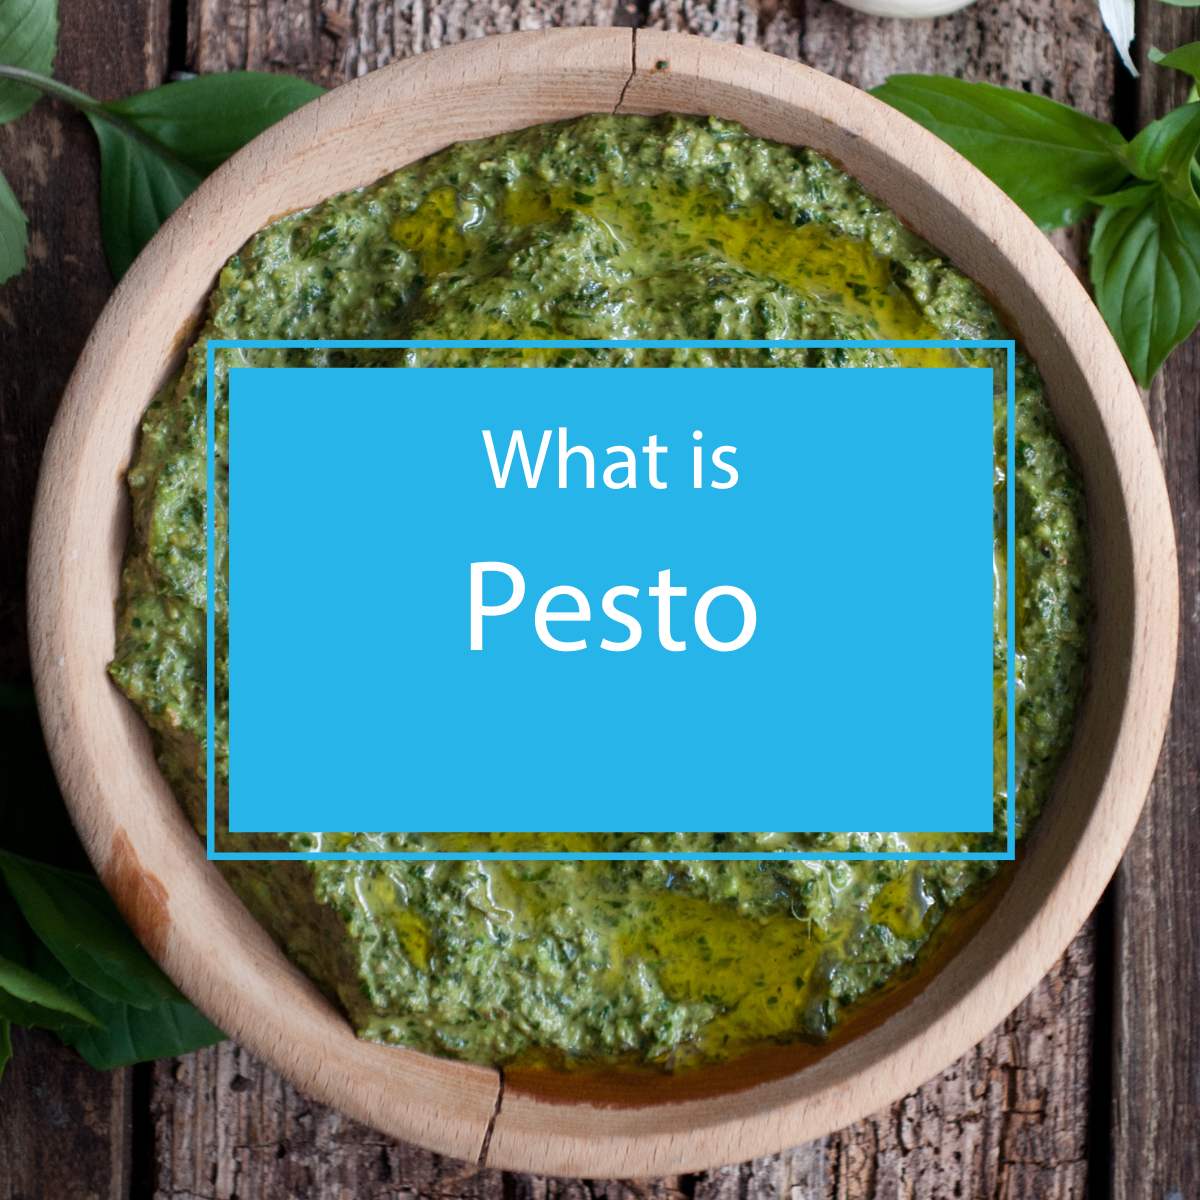 What is Pesto